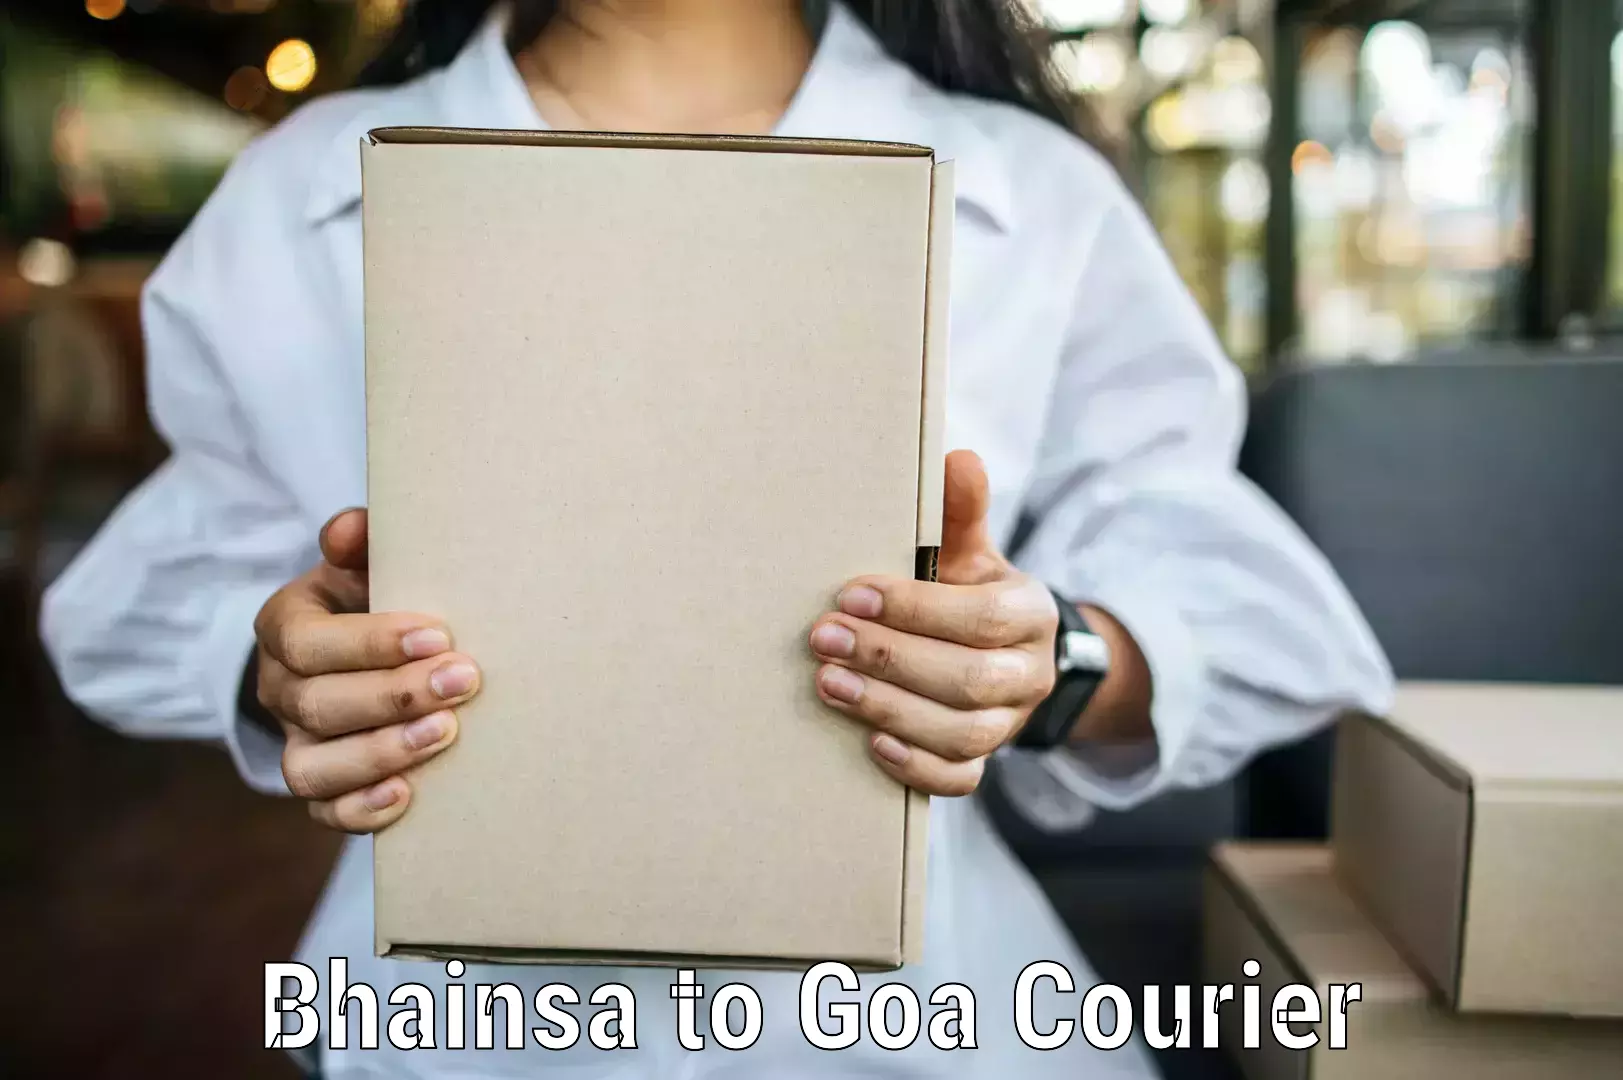 Reliable delivery network Bhainsa to Goa